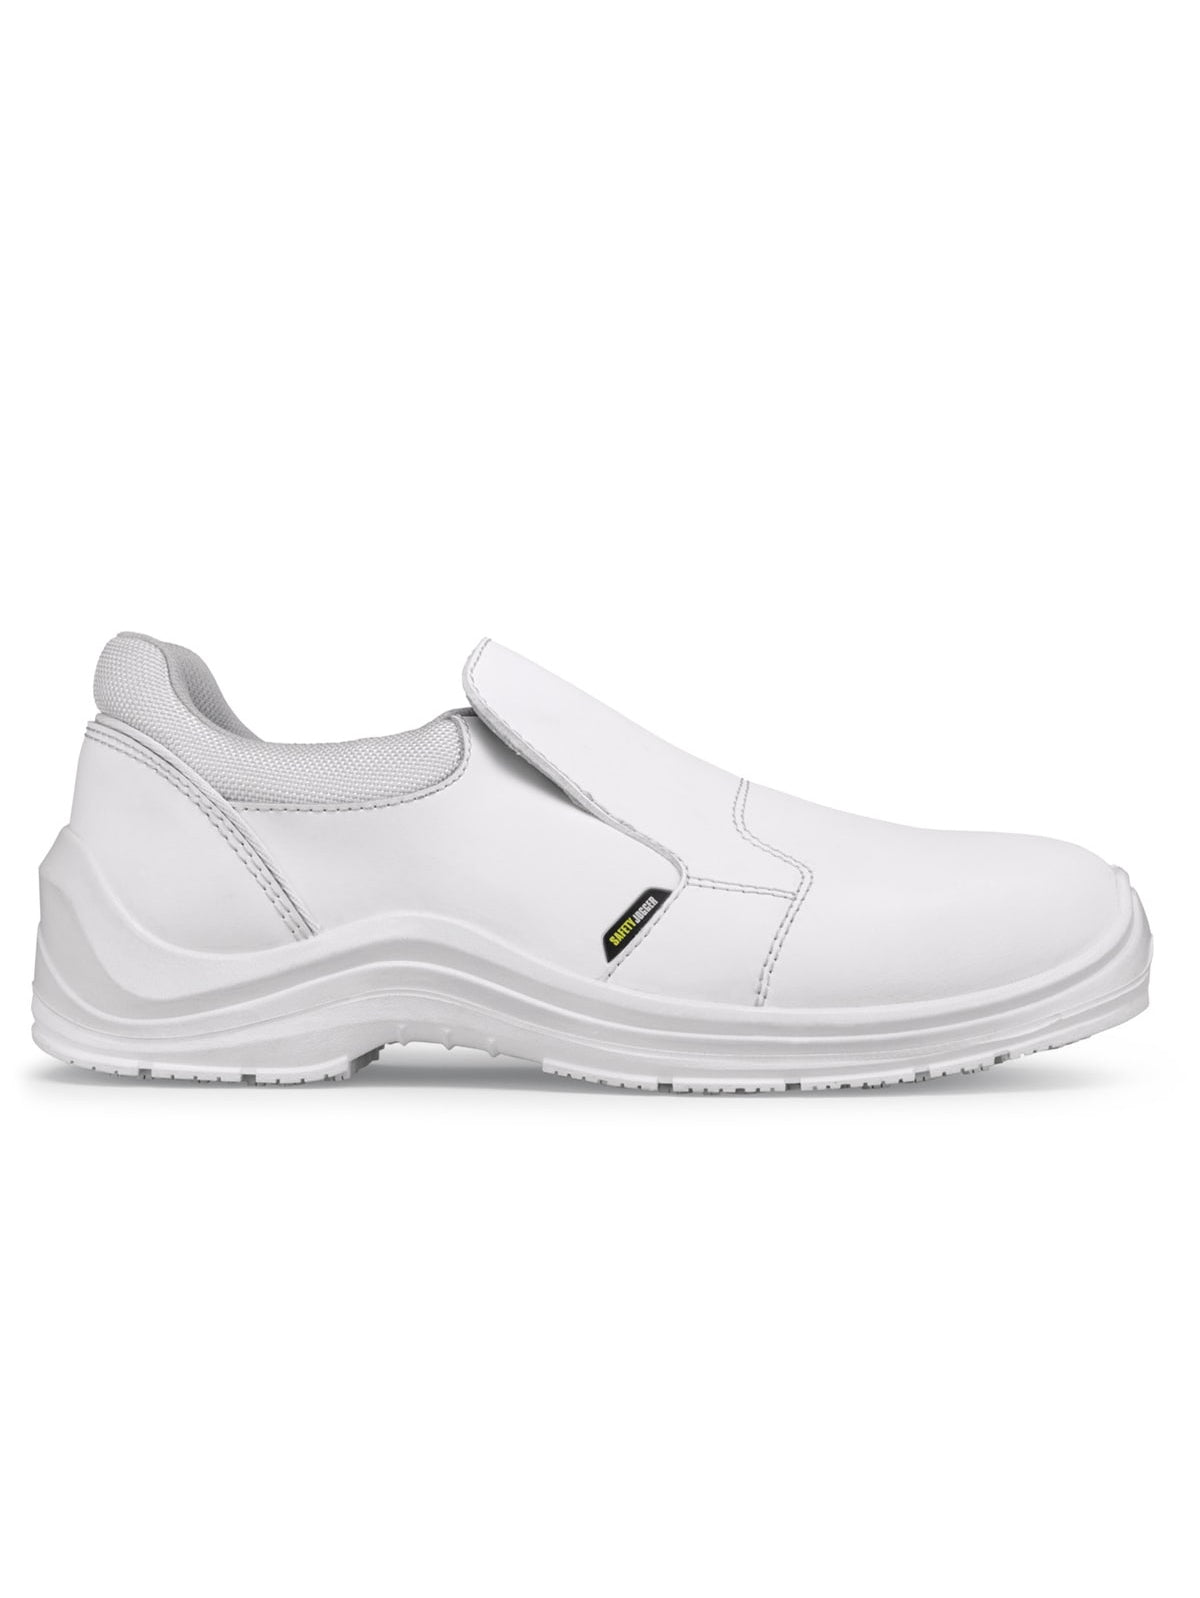 Unisex Work Shoe Gusto81 White (S3) by Safety Jogger -  ChefsCotton